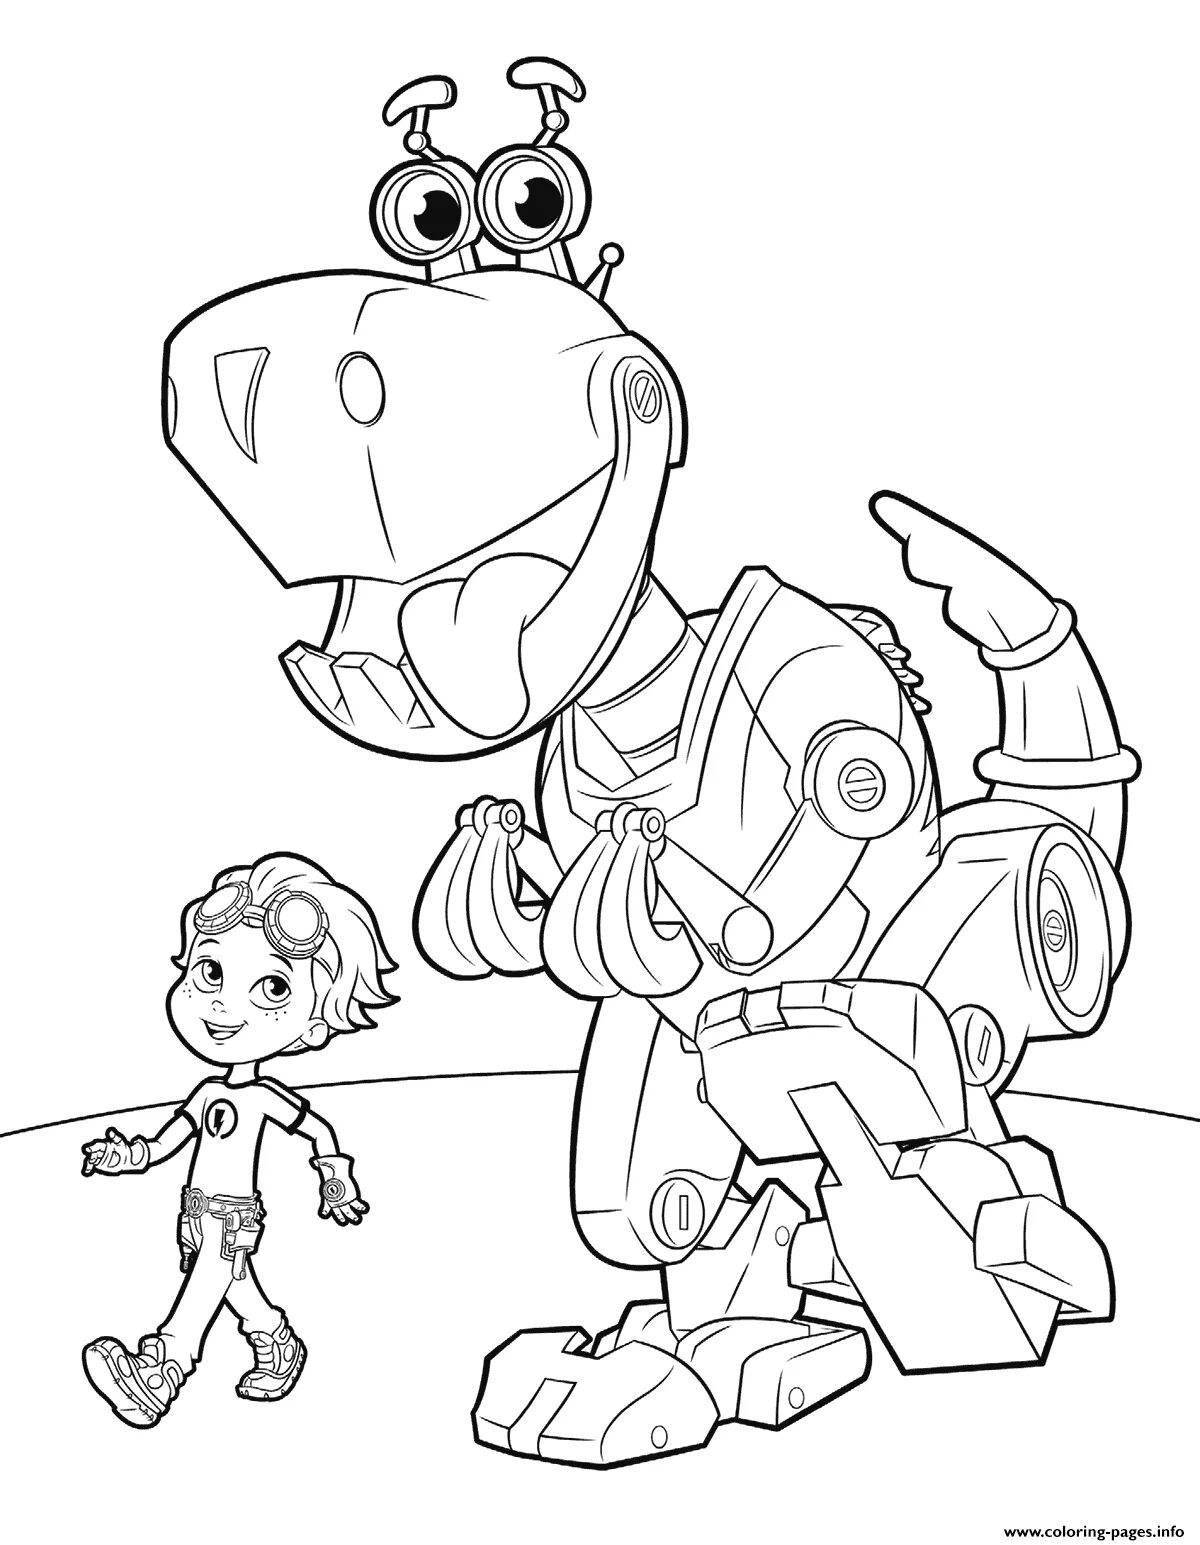 Adorable robot coloring pages for boys 5-6 years old